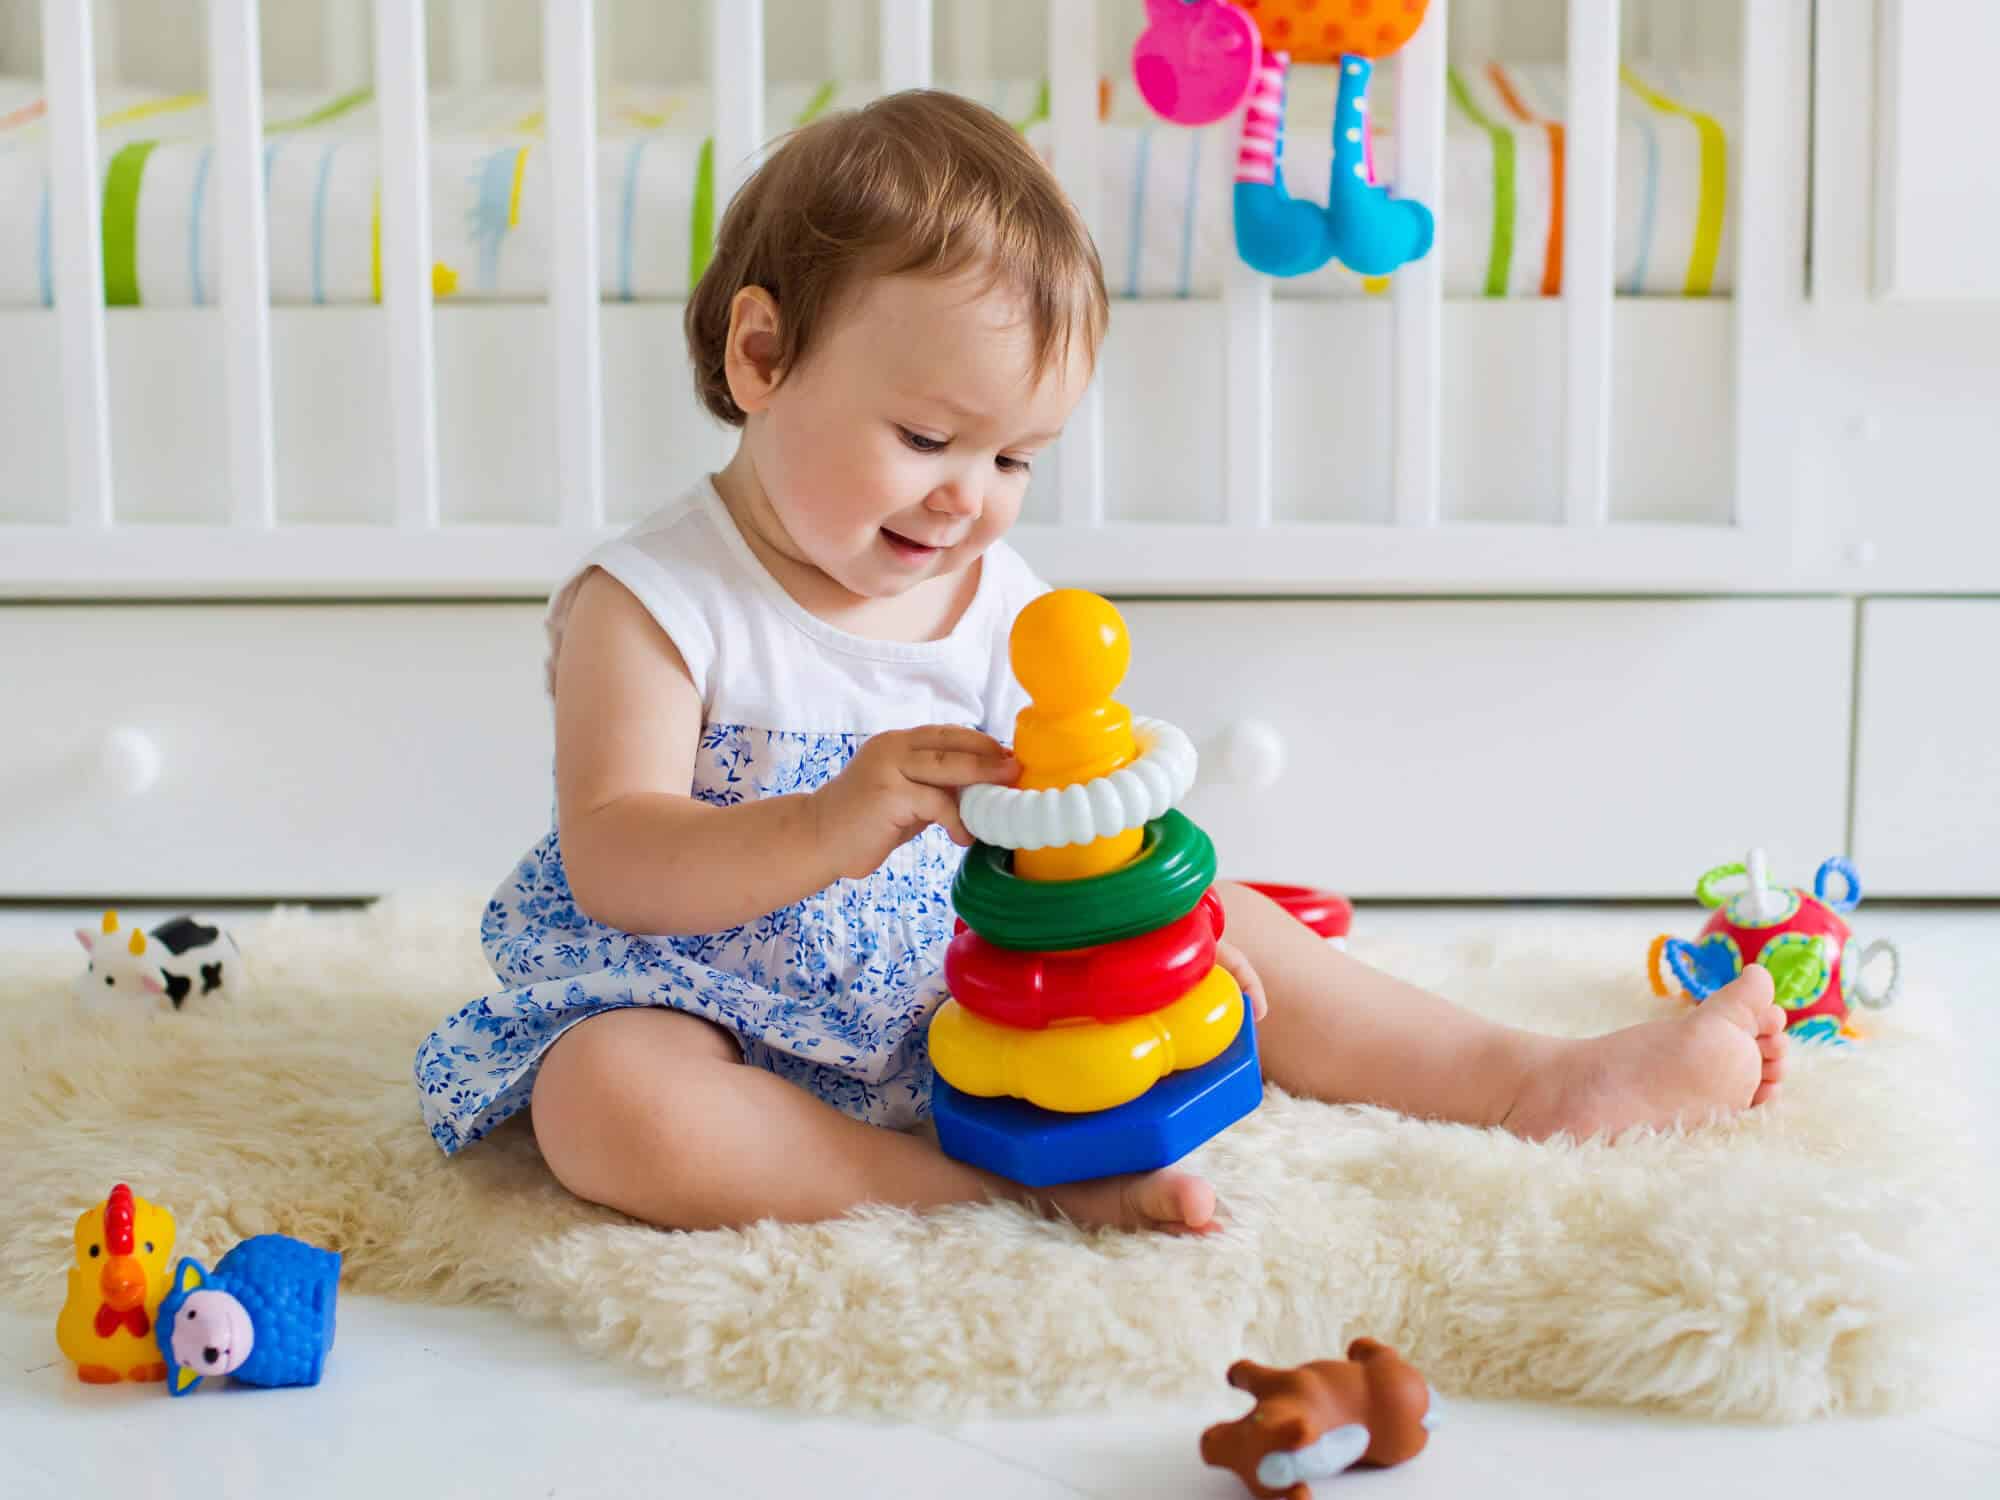 Toddler playing with toys - Toy Safety Awareness